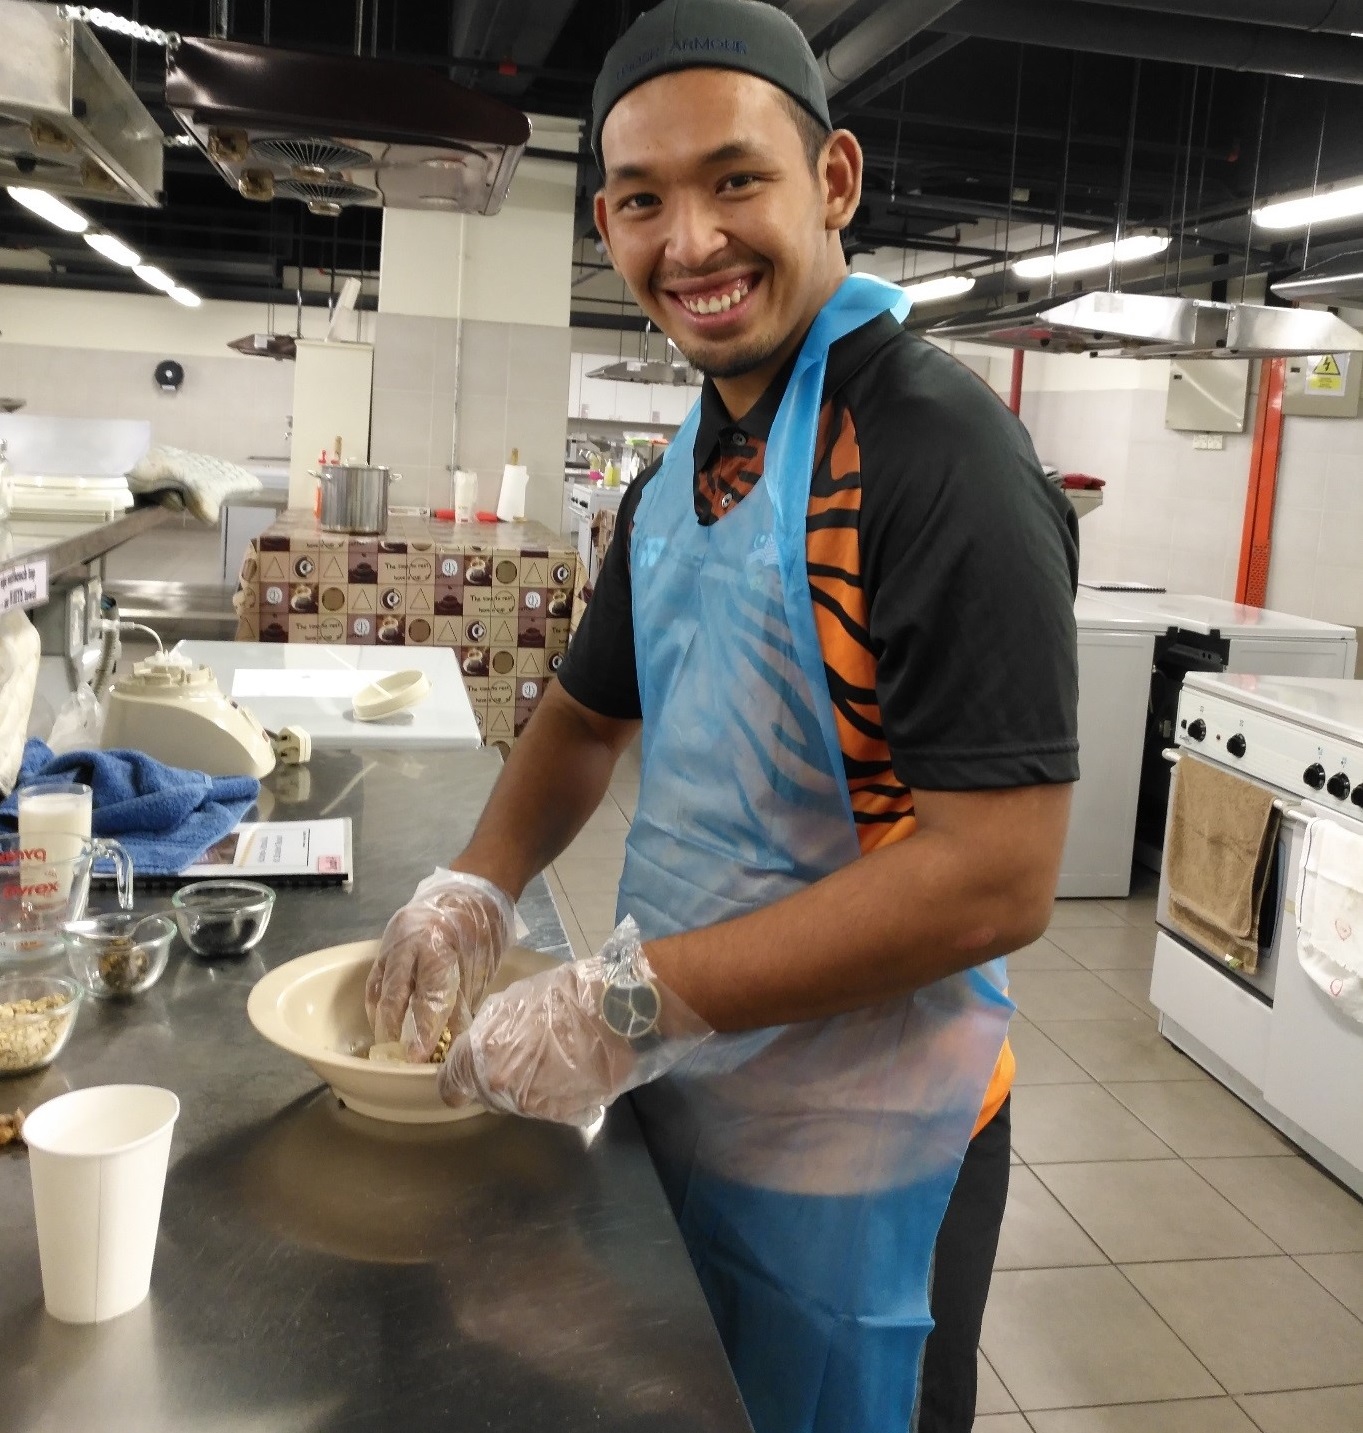 A Malaysian athlete prepares snack at IMU